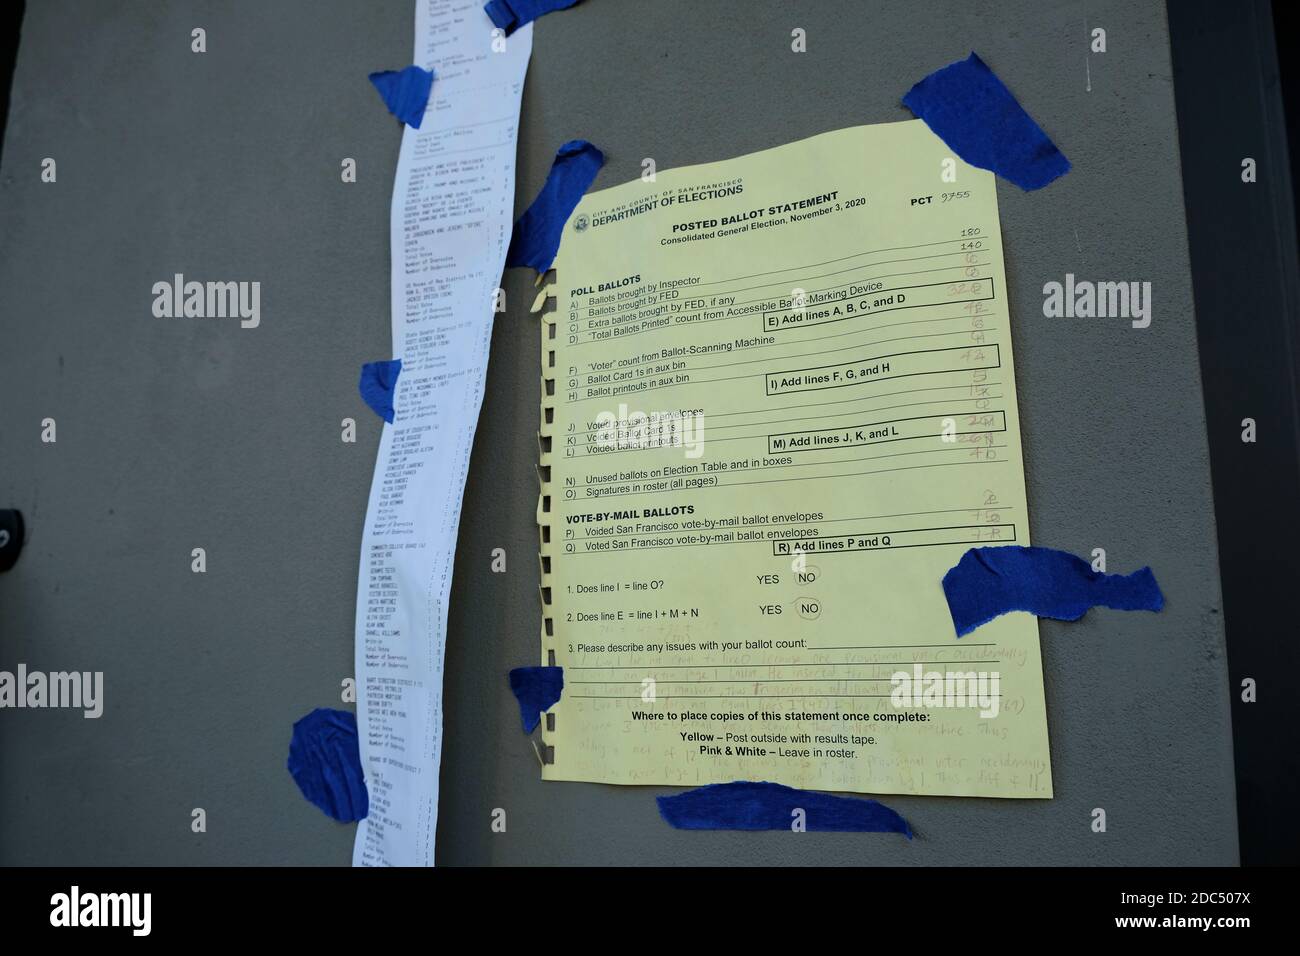 Posted ballot statement with tally of votes cast taped outside a San Francisco, California voting location; November 2020 presidential election. Stock Photo